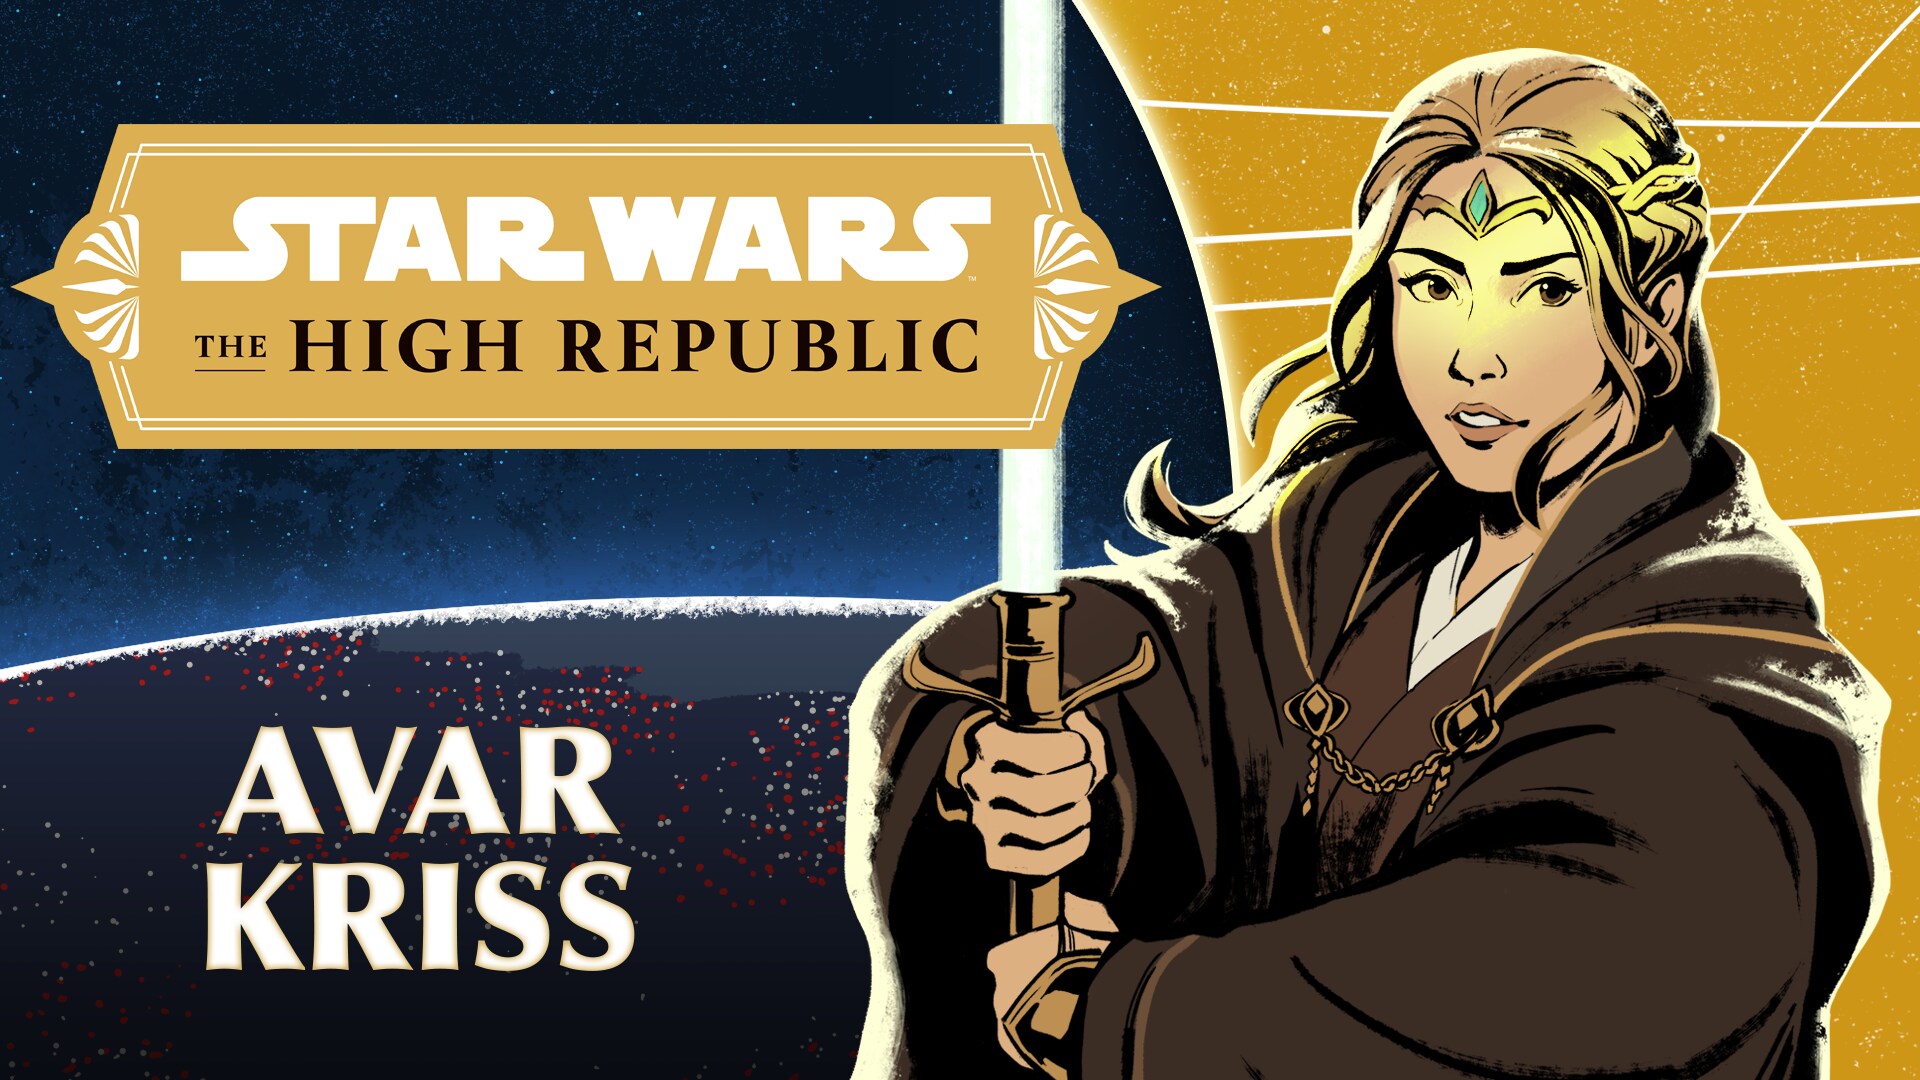 Avar Kriss | Characters of Star Wars: The High Republic